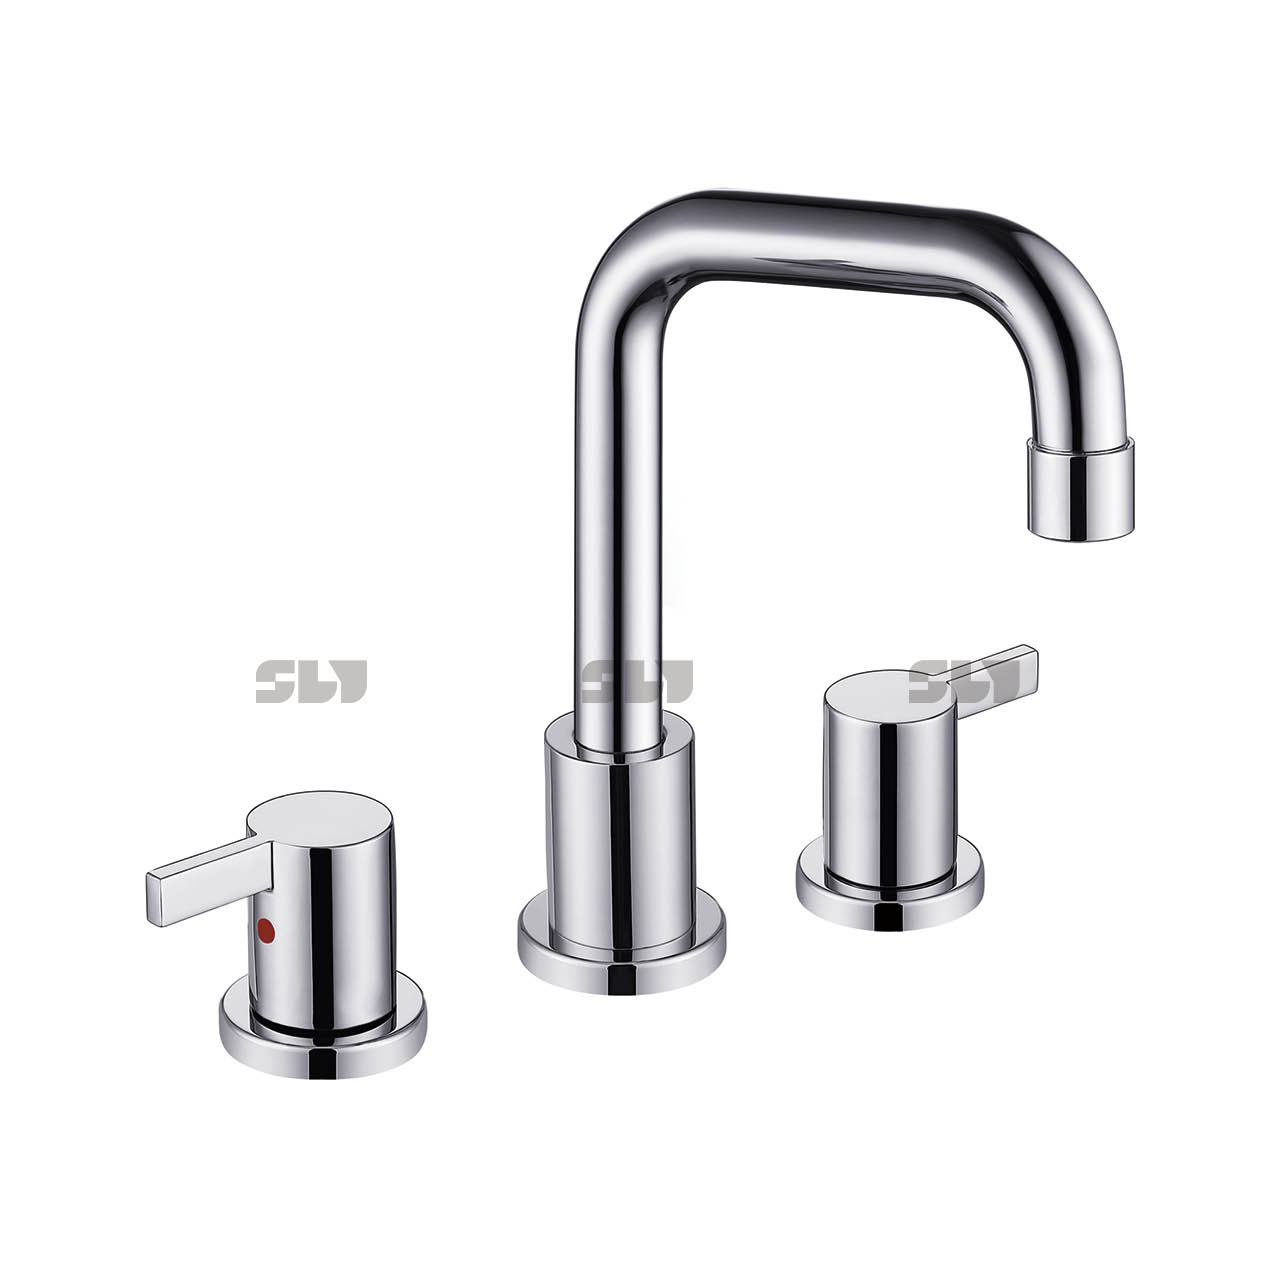 SLY Double Handle Hot And Cold Faucets for Bathrooms